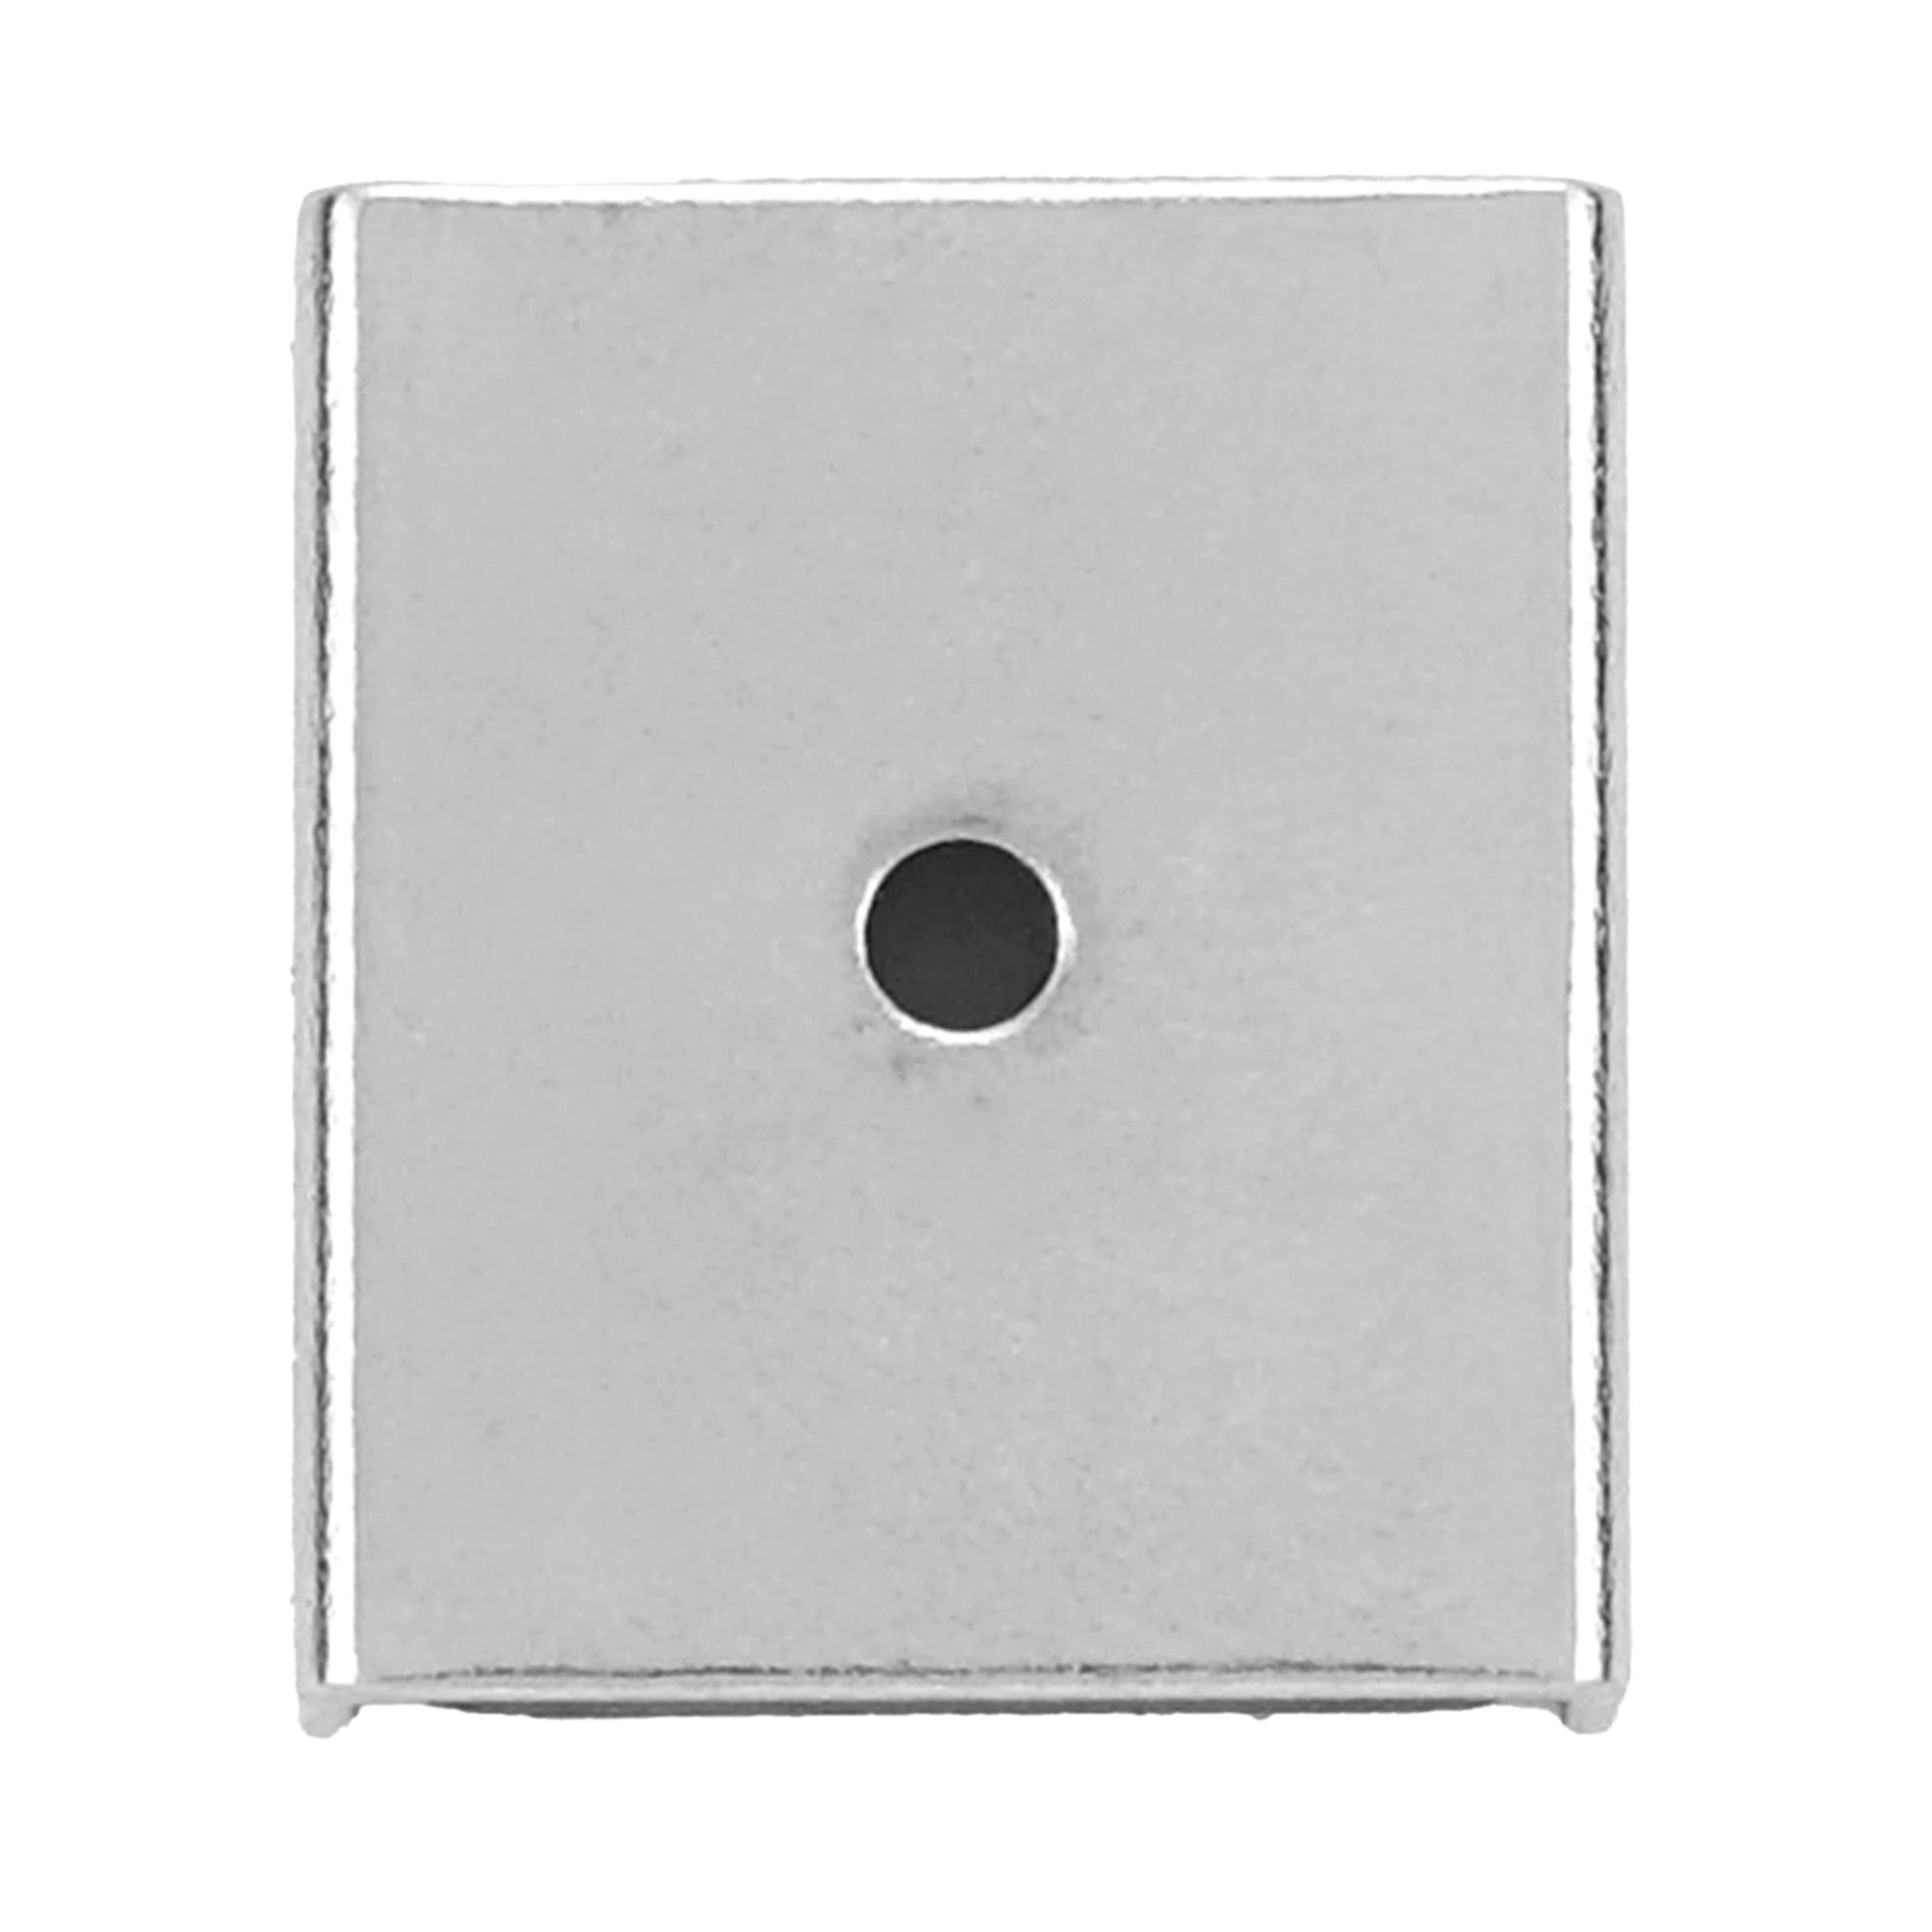 Load image into Gallery viewer, CA403C Ceramic Latch Magnet Channel Assembly - Front View